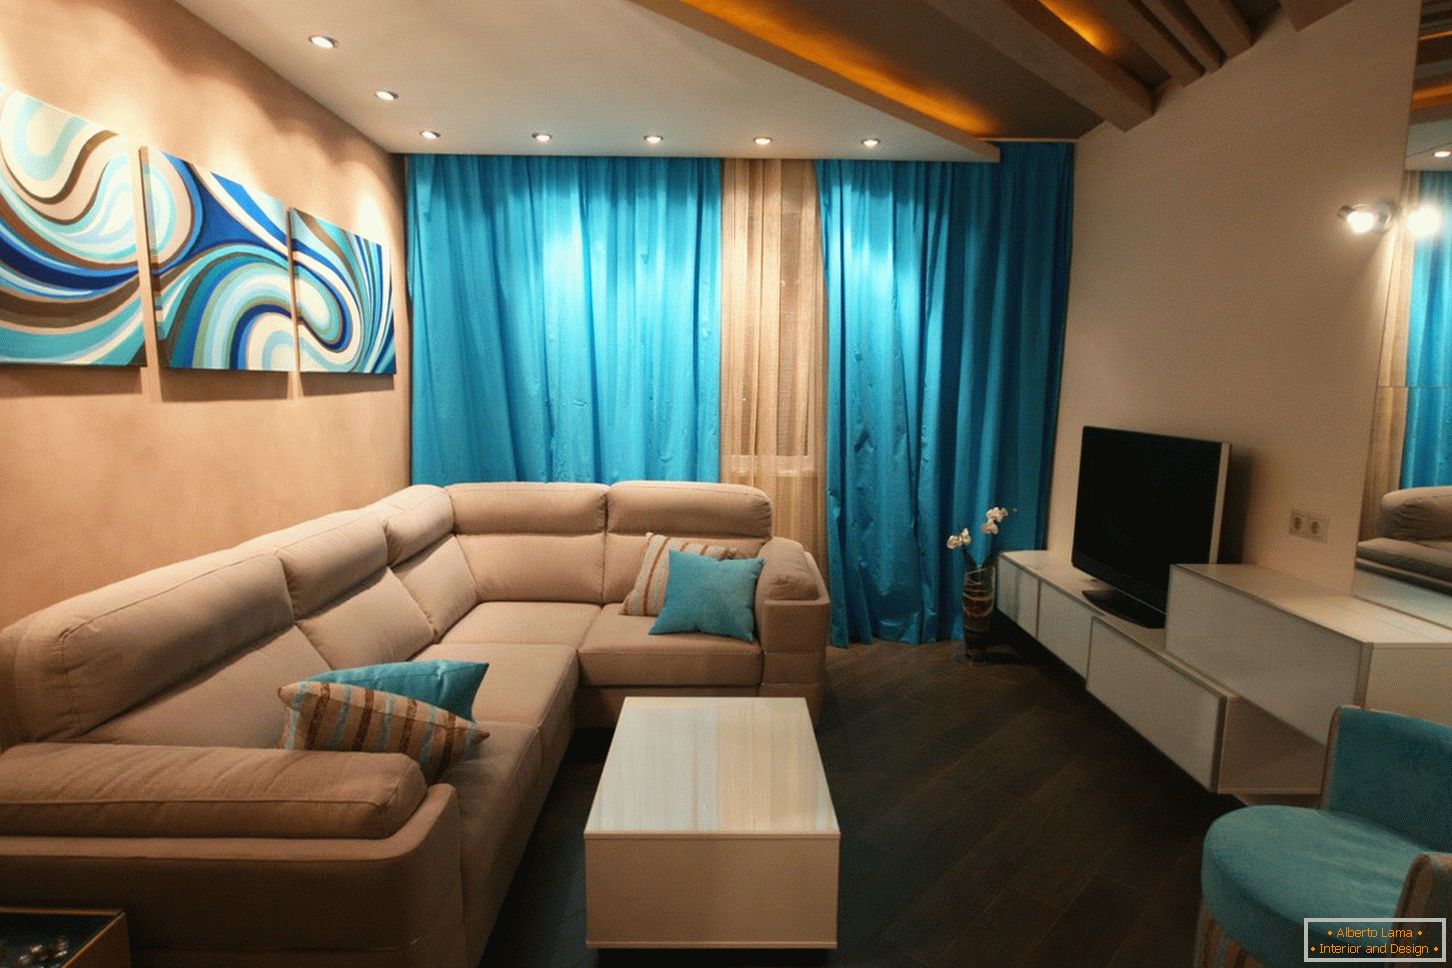 Turquoise and beige in the interior of the living room